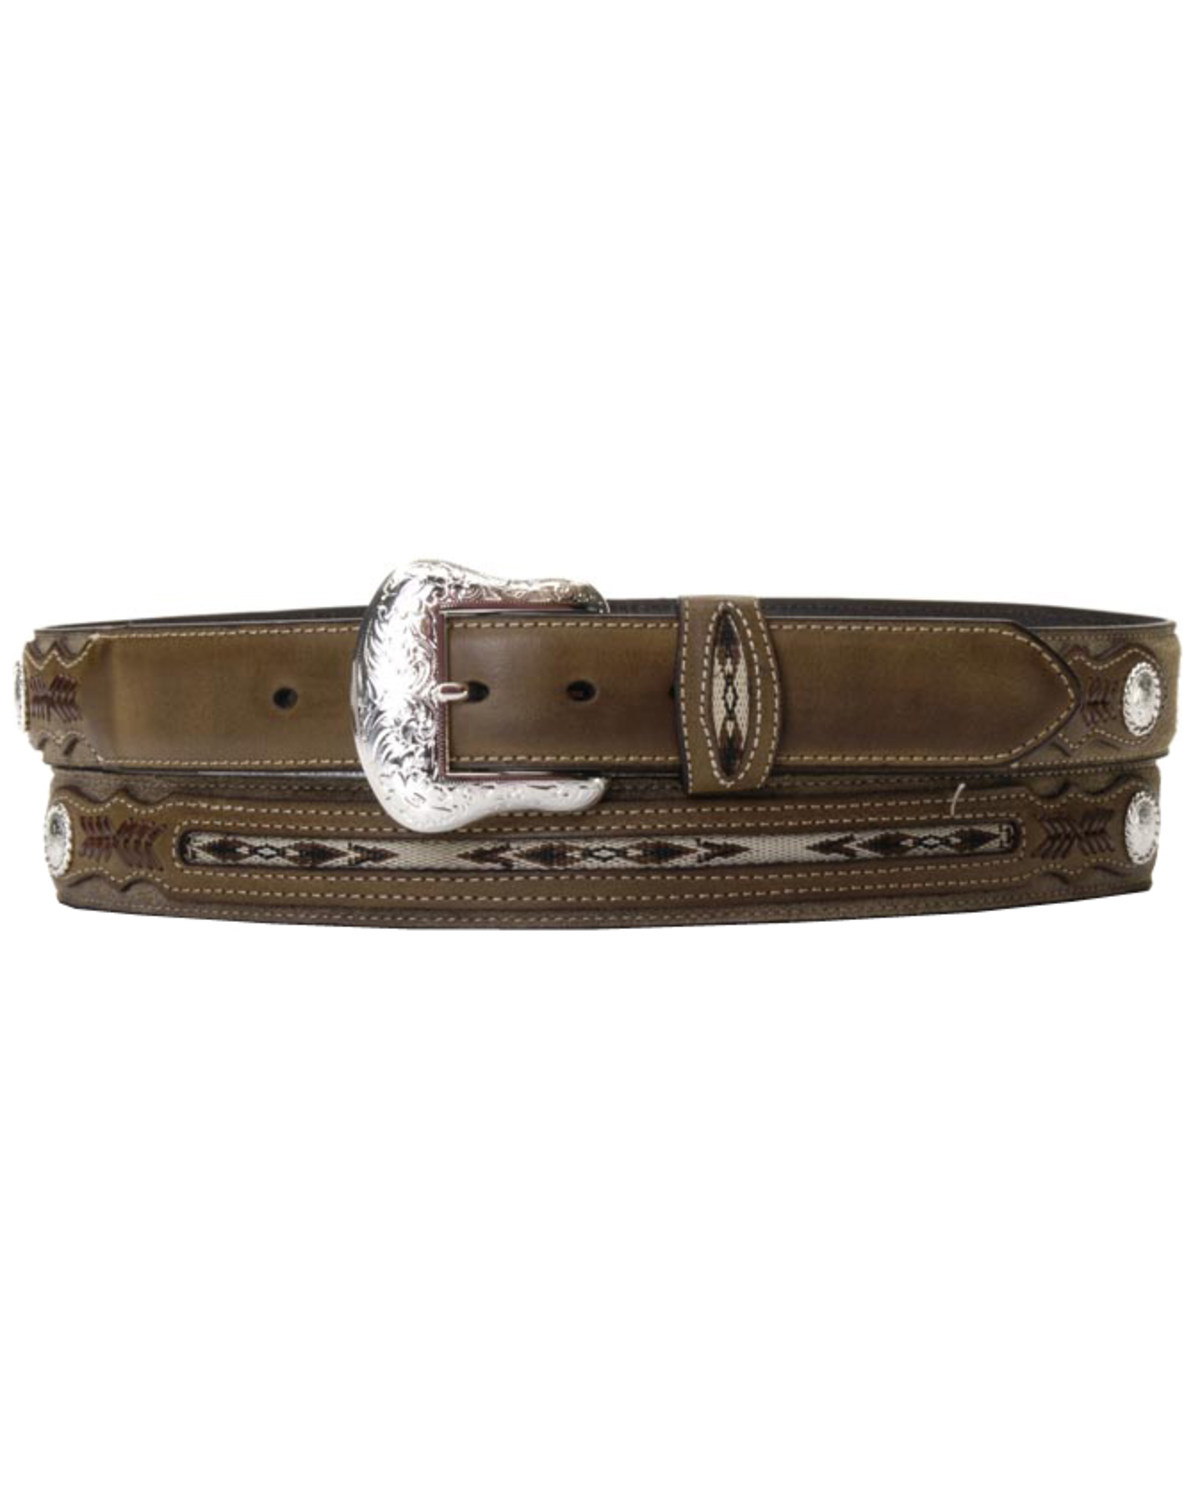 Nocona Men's Rough-Out and Overlay Western Belt